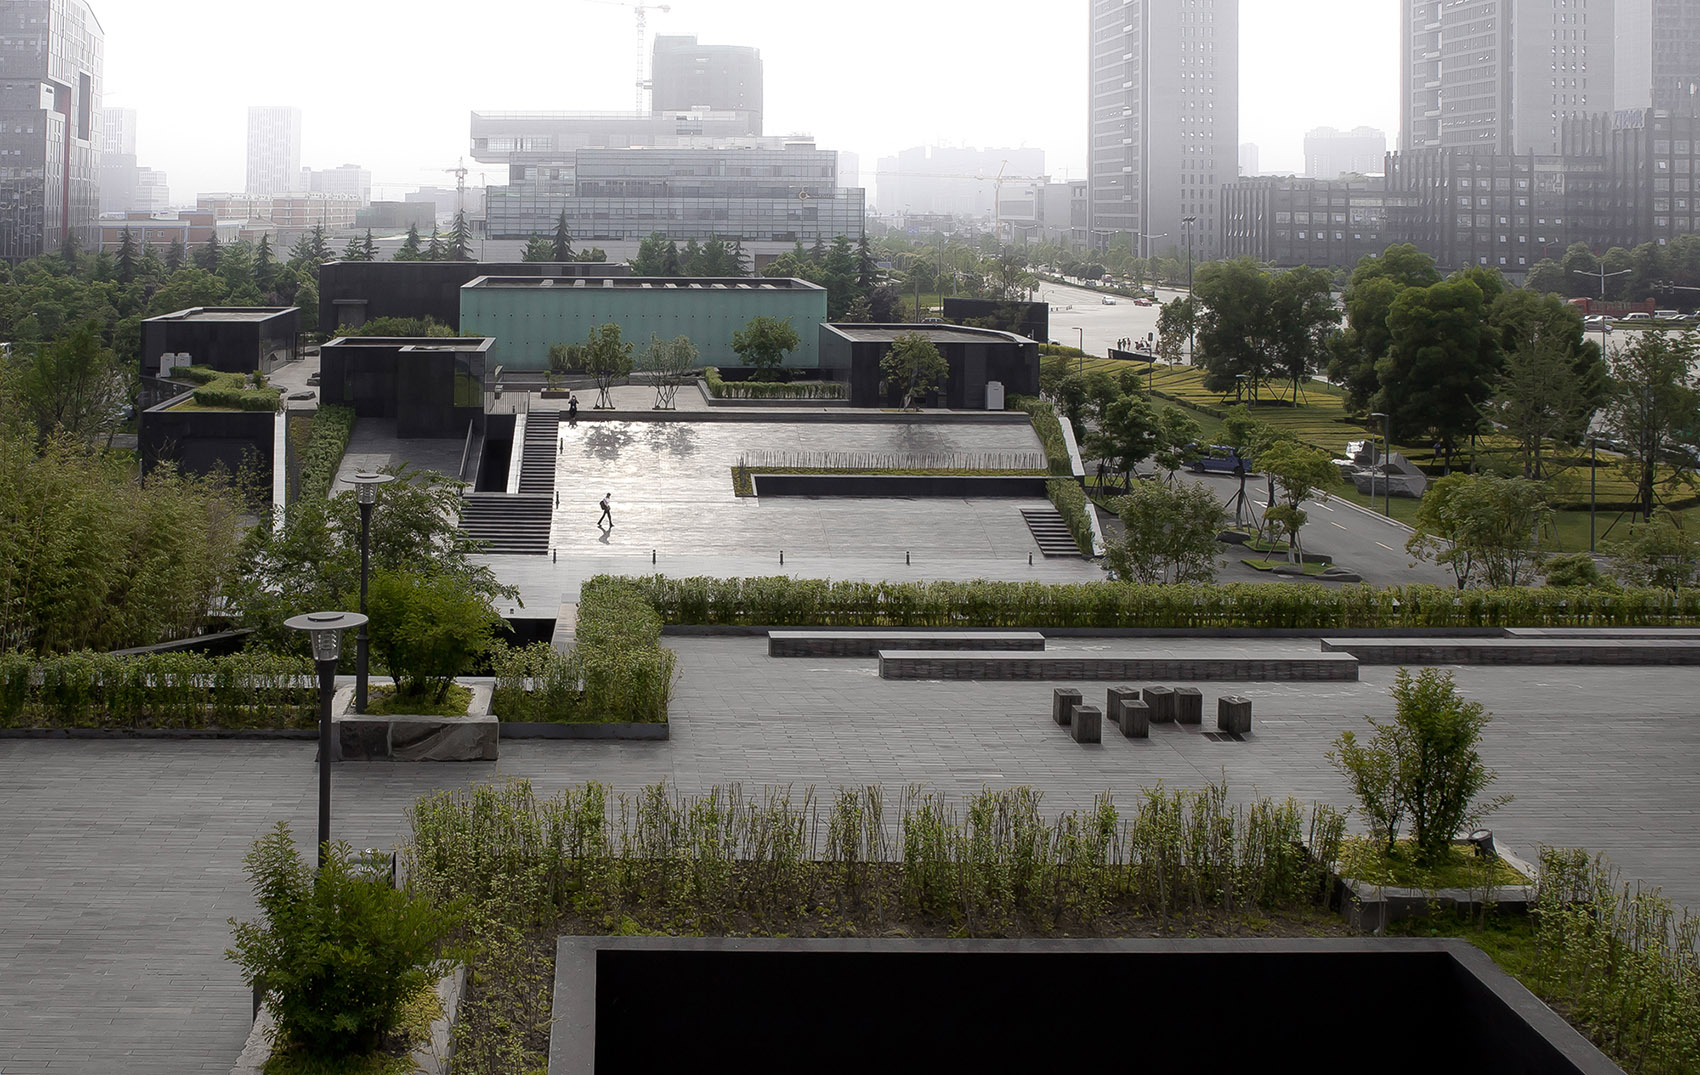 008-museum-of-contemporary-arts-china-by-jiakun-architects.jpg